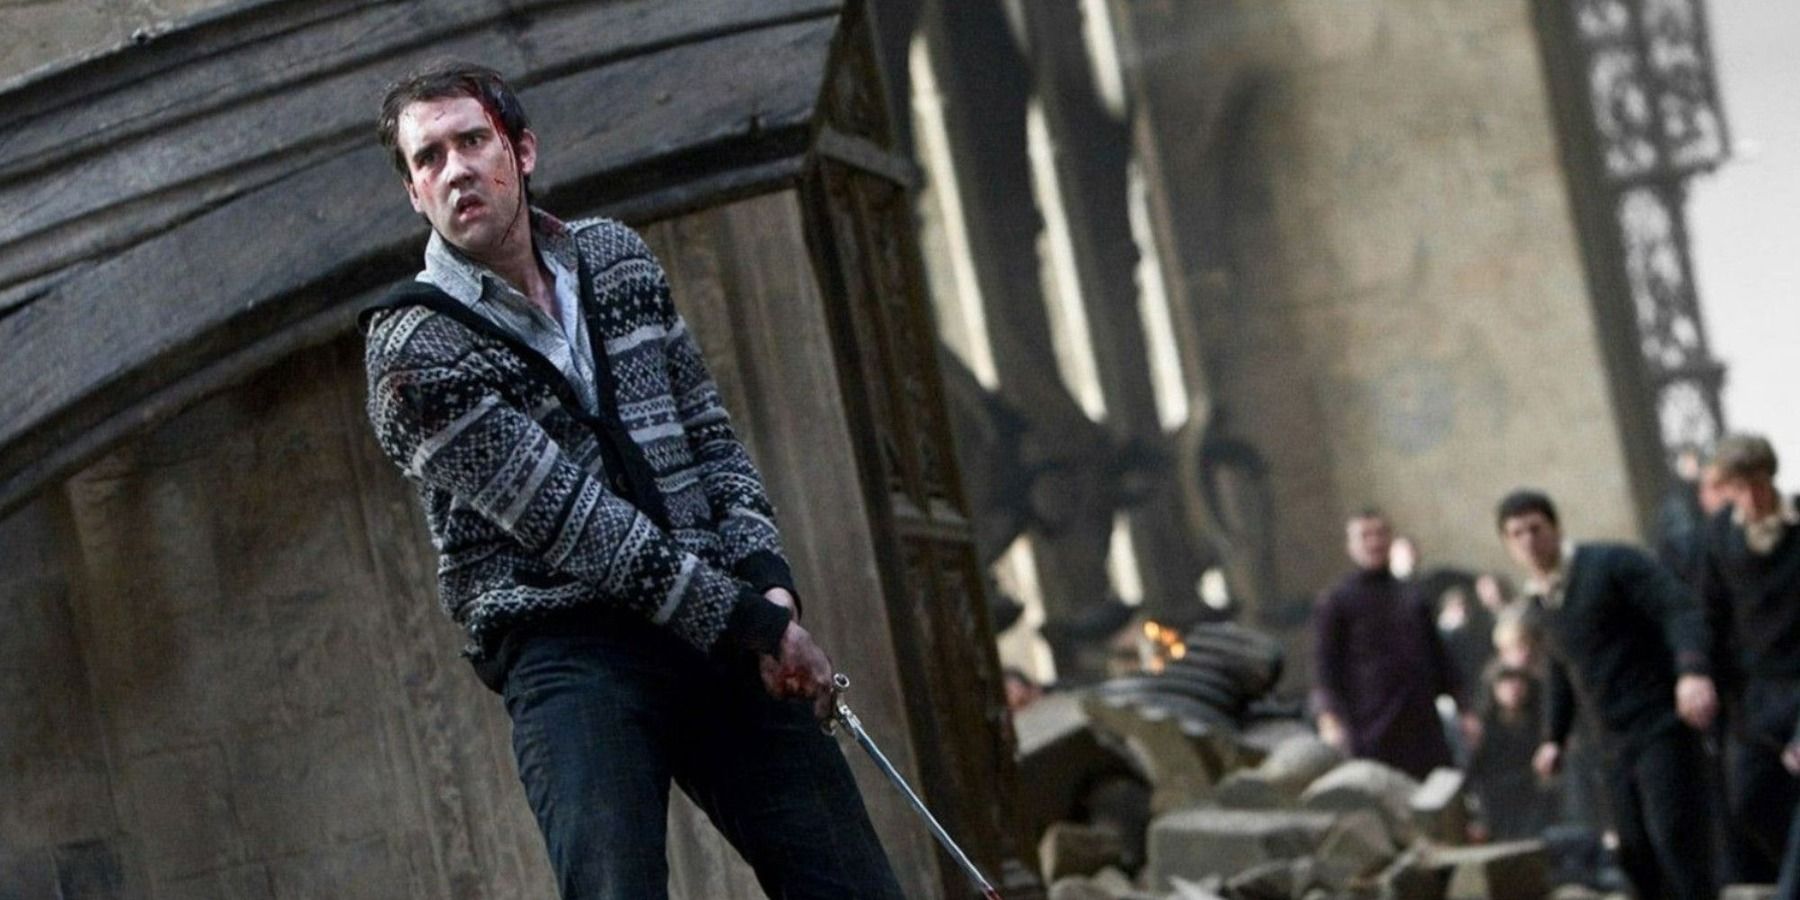 Harry Potter Ways Neville Longbottom Could Be The Perfect Chosen One Neville and the Sword of Gryffindor (1)